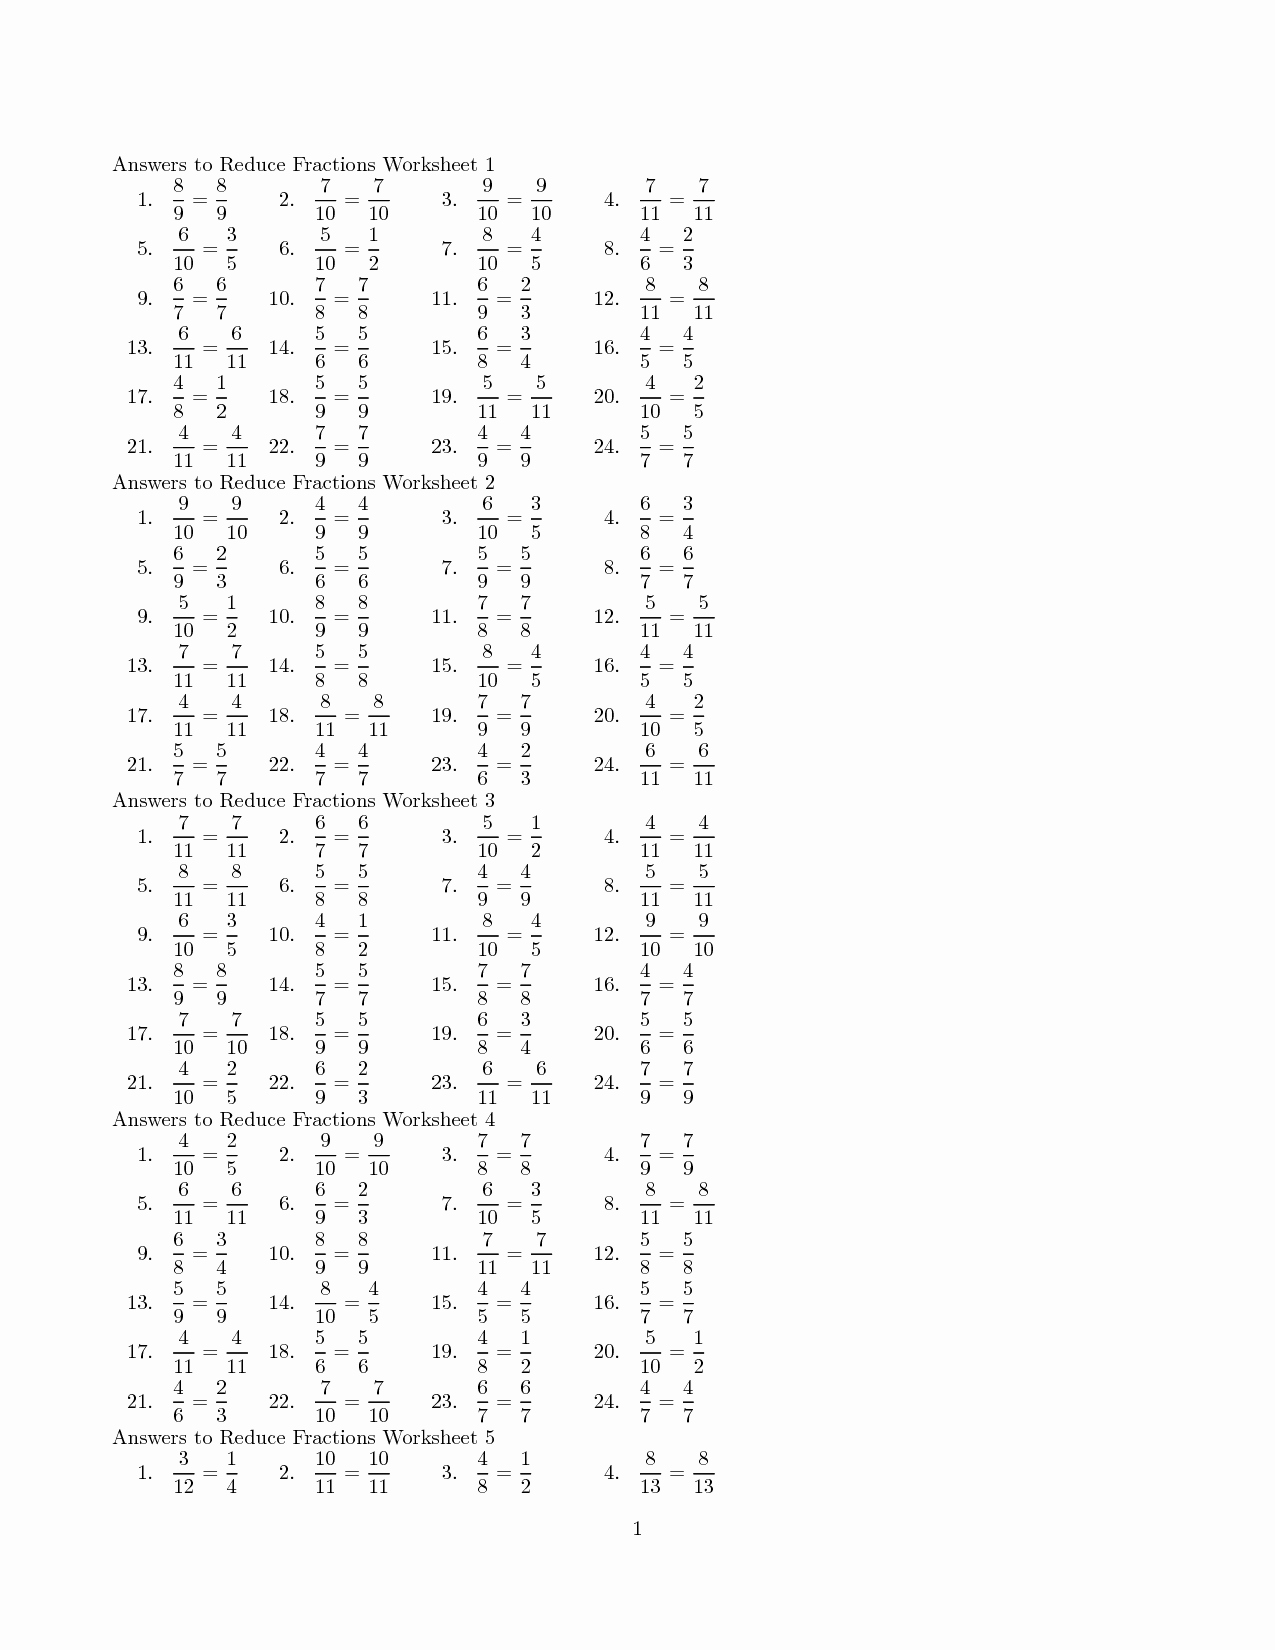 Reducing Fractions Worksheet Pdf Inspirational Reducing Fractions to Lowest Terms Worksheet with Answers